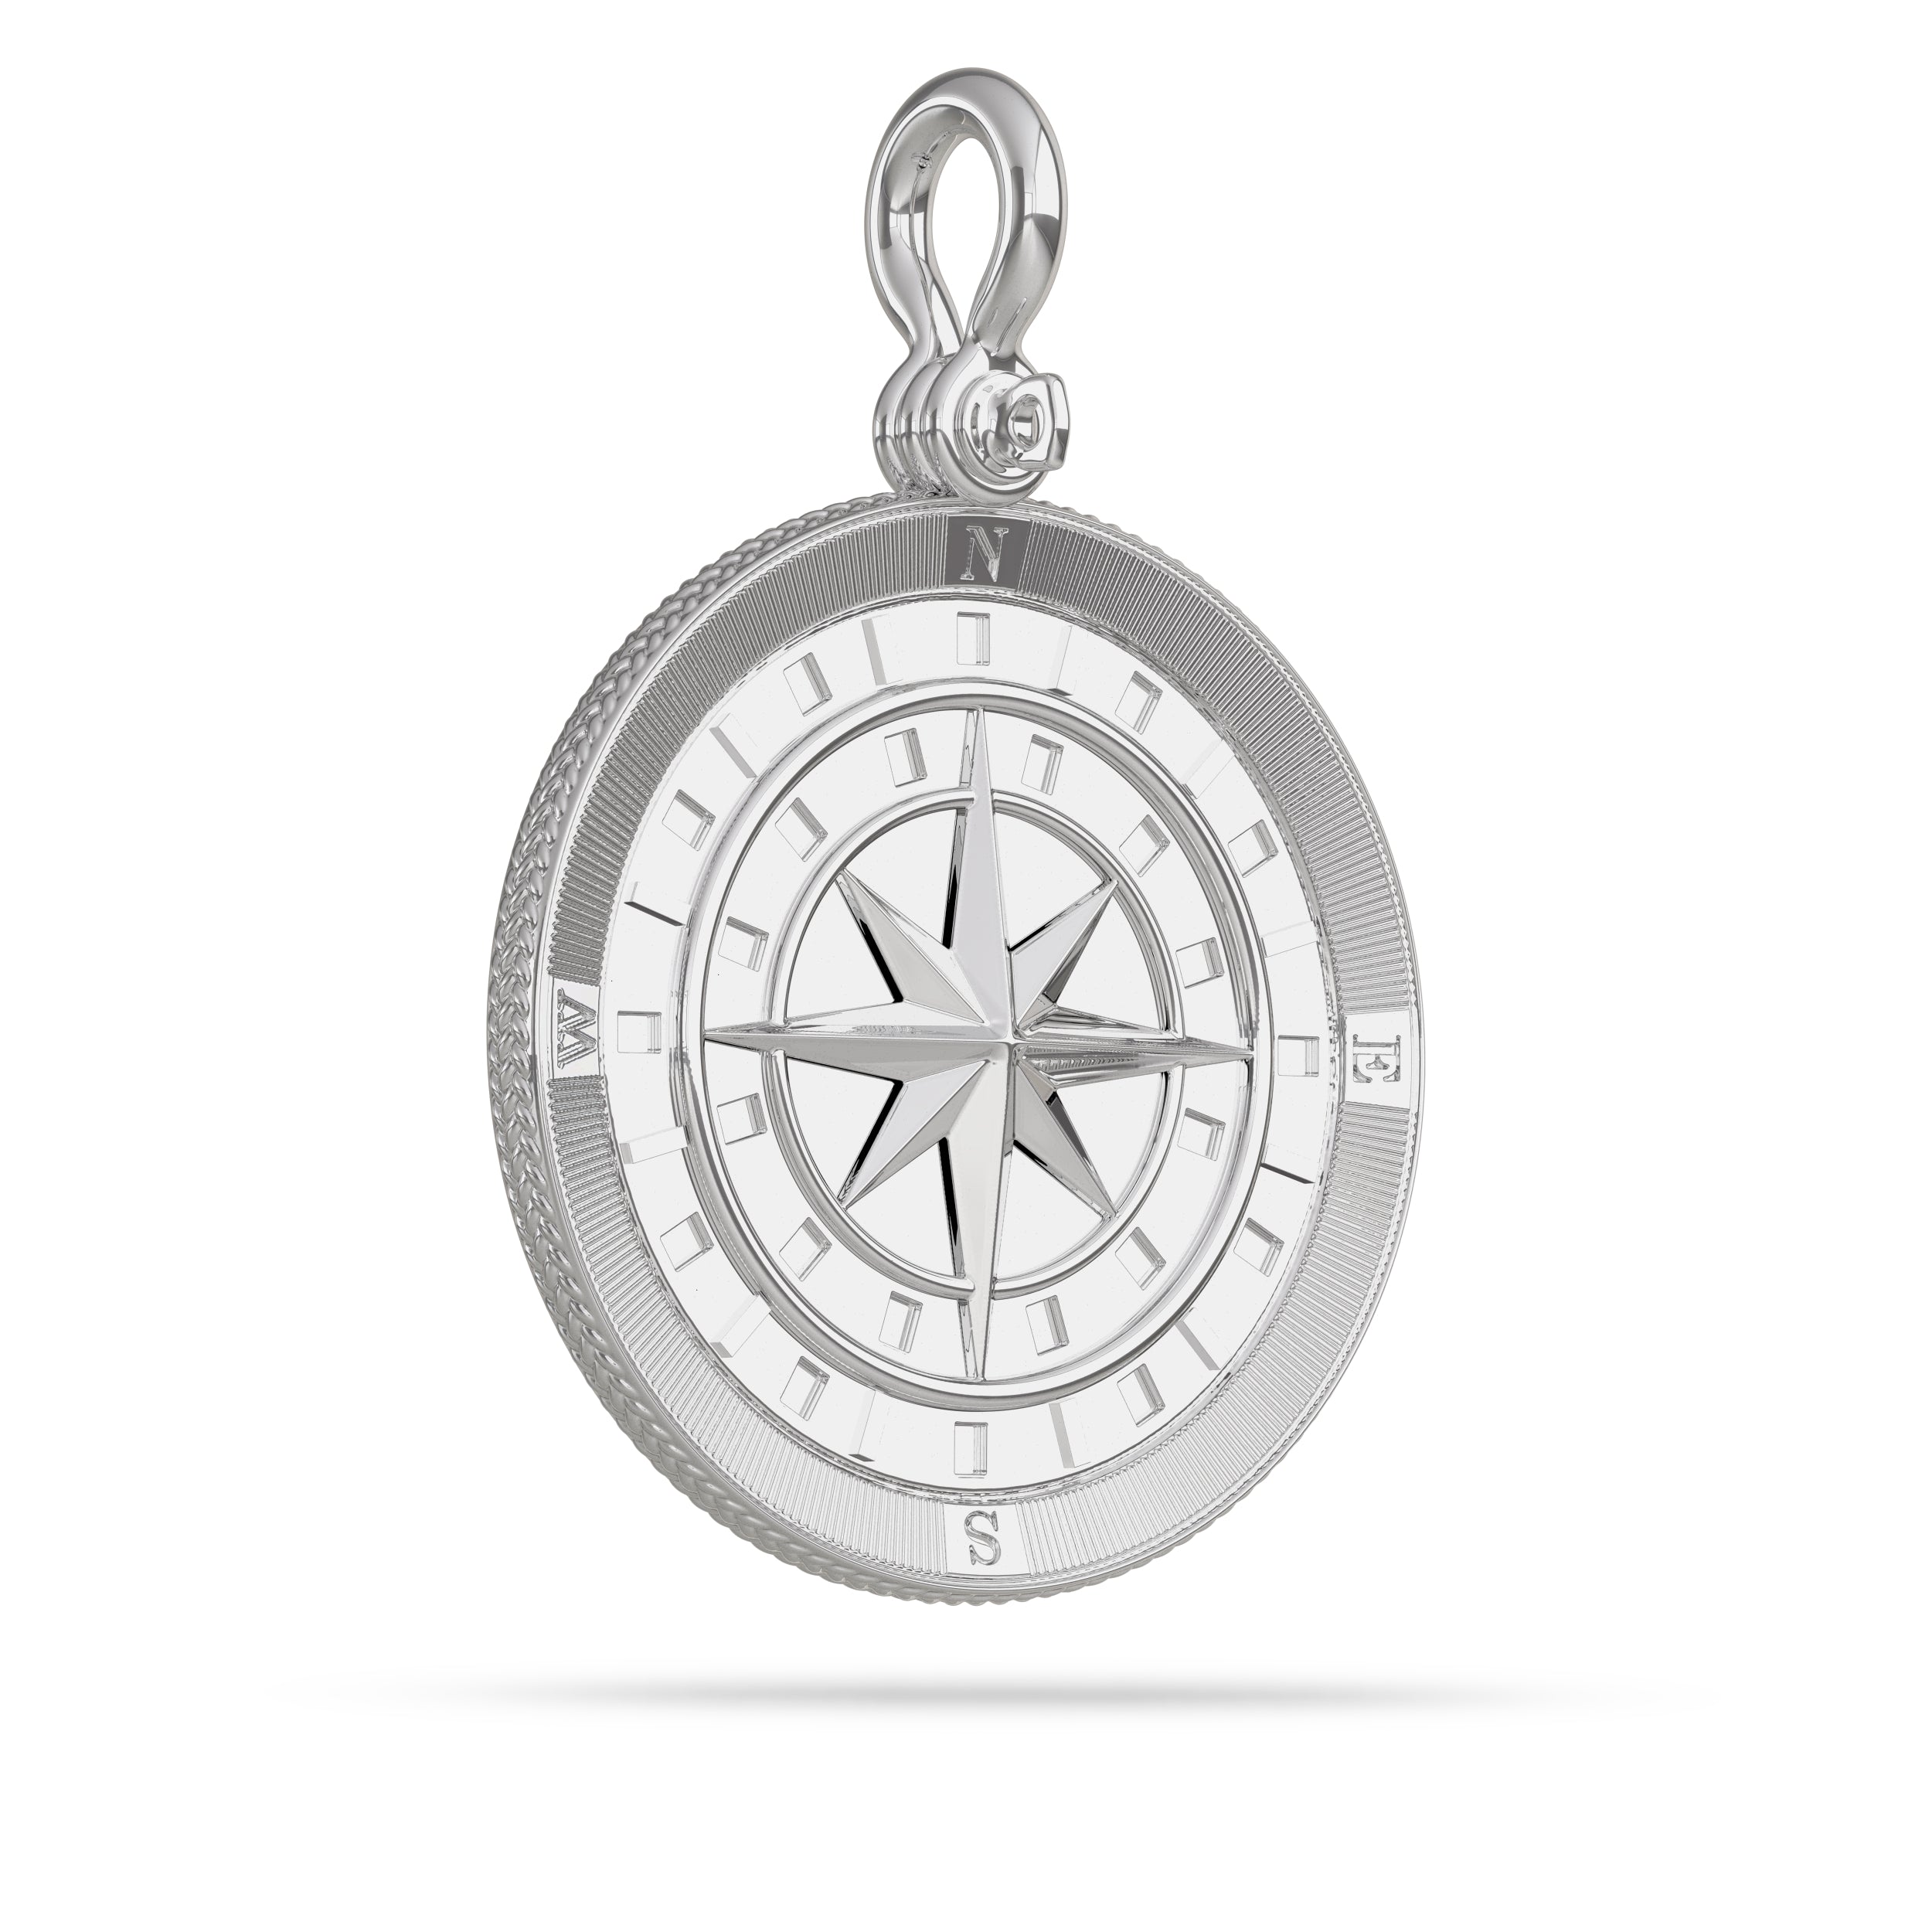 Compass Medallion Pendant Large in 925 Silver by Nautical Treasure